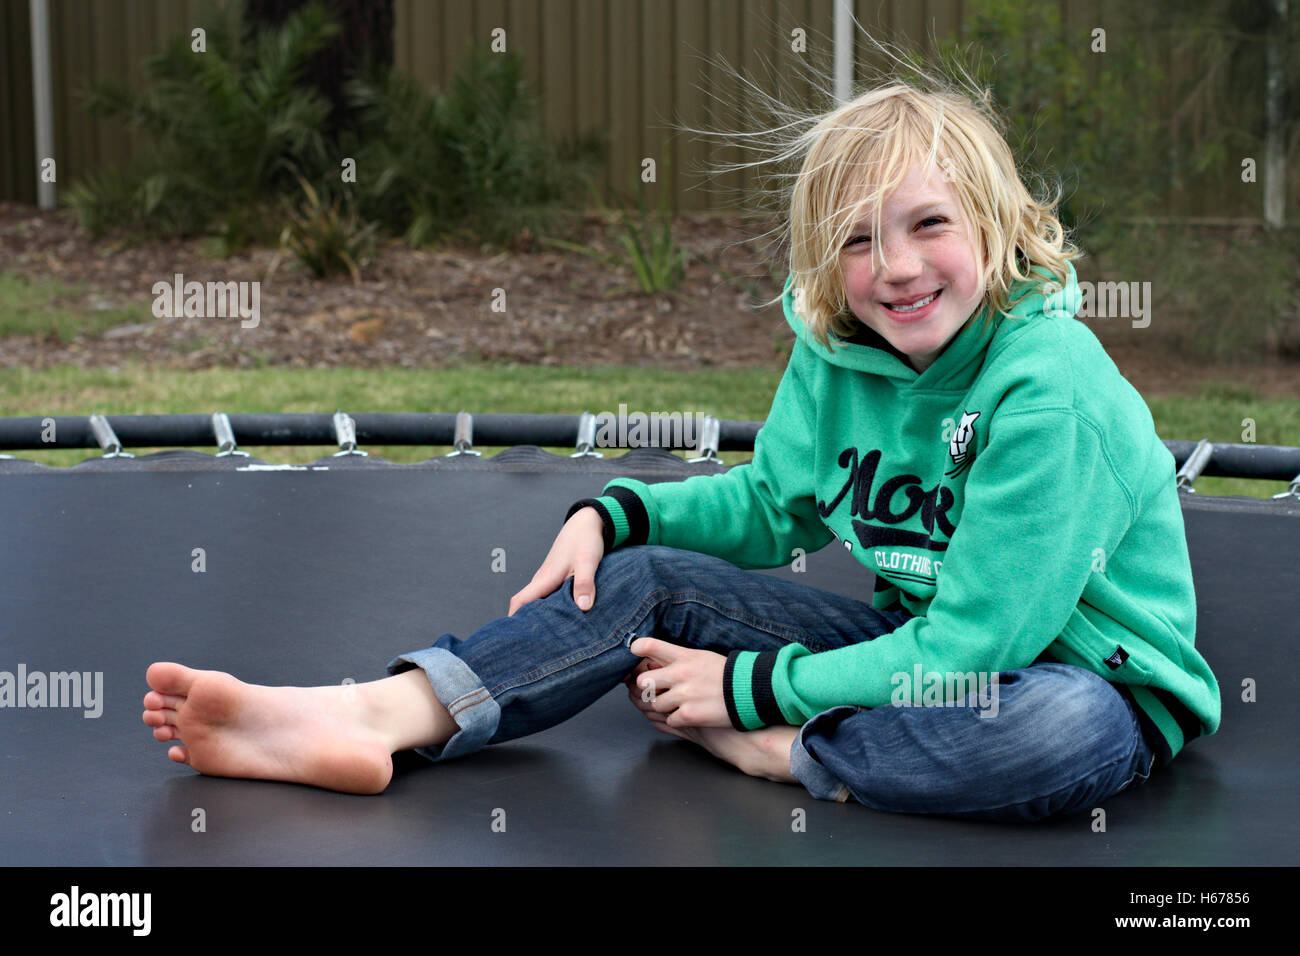 Blonde haired boy sitting smiling on trampoline. Stock Photo